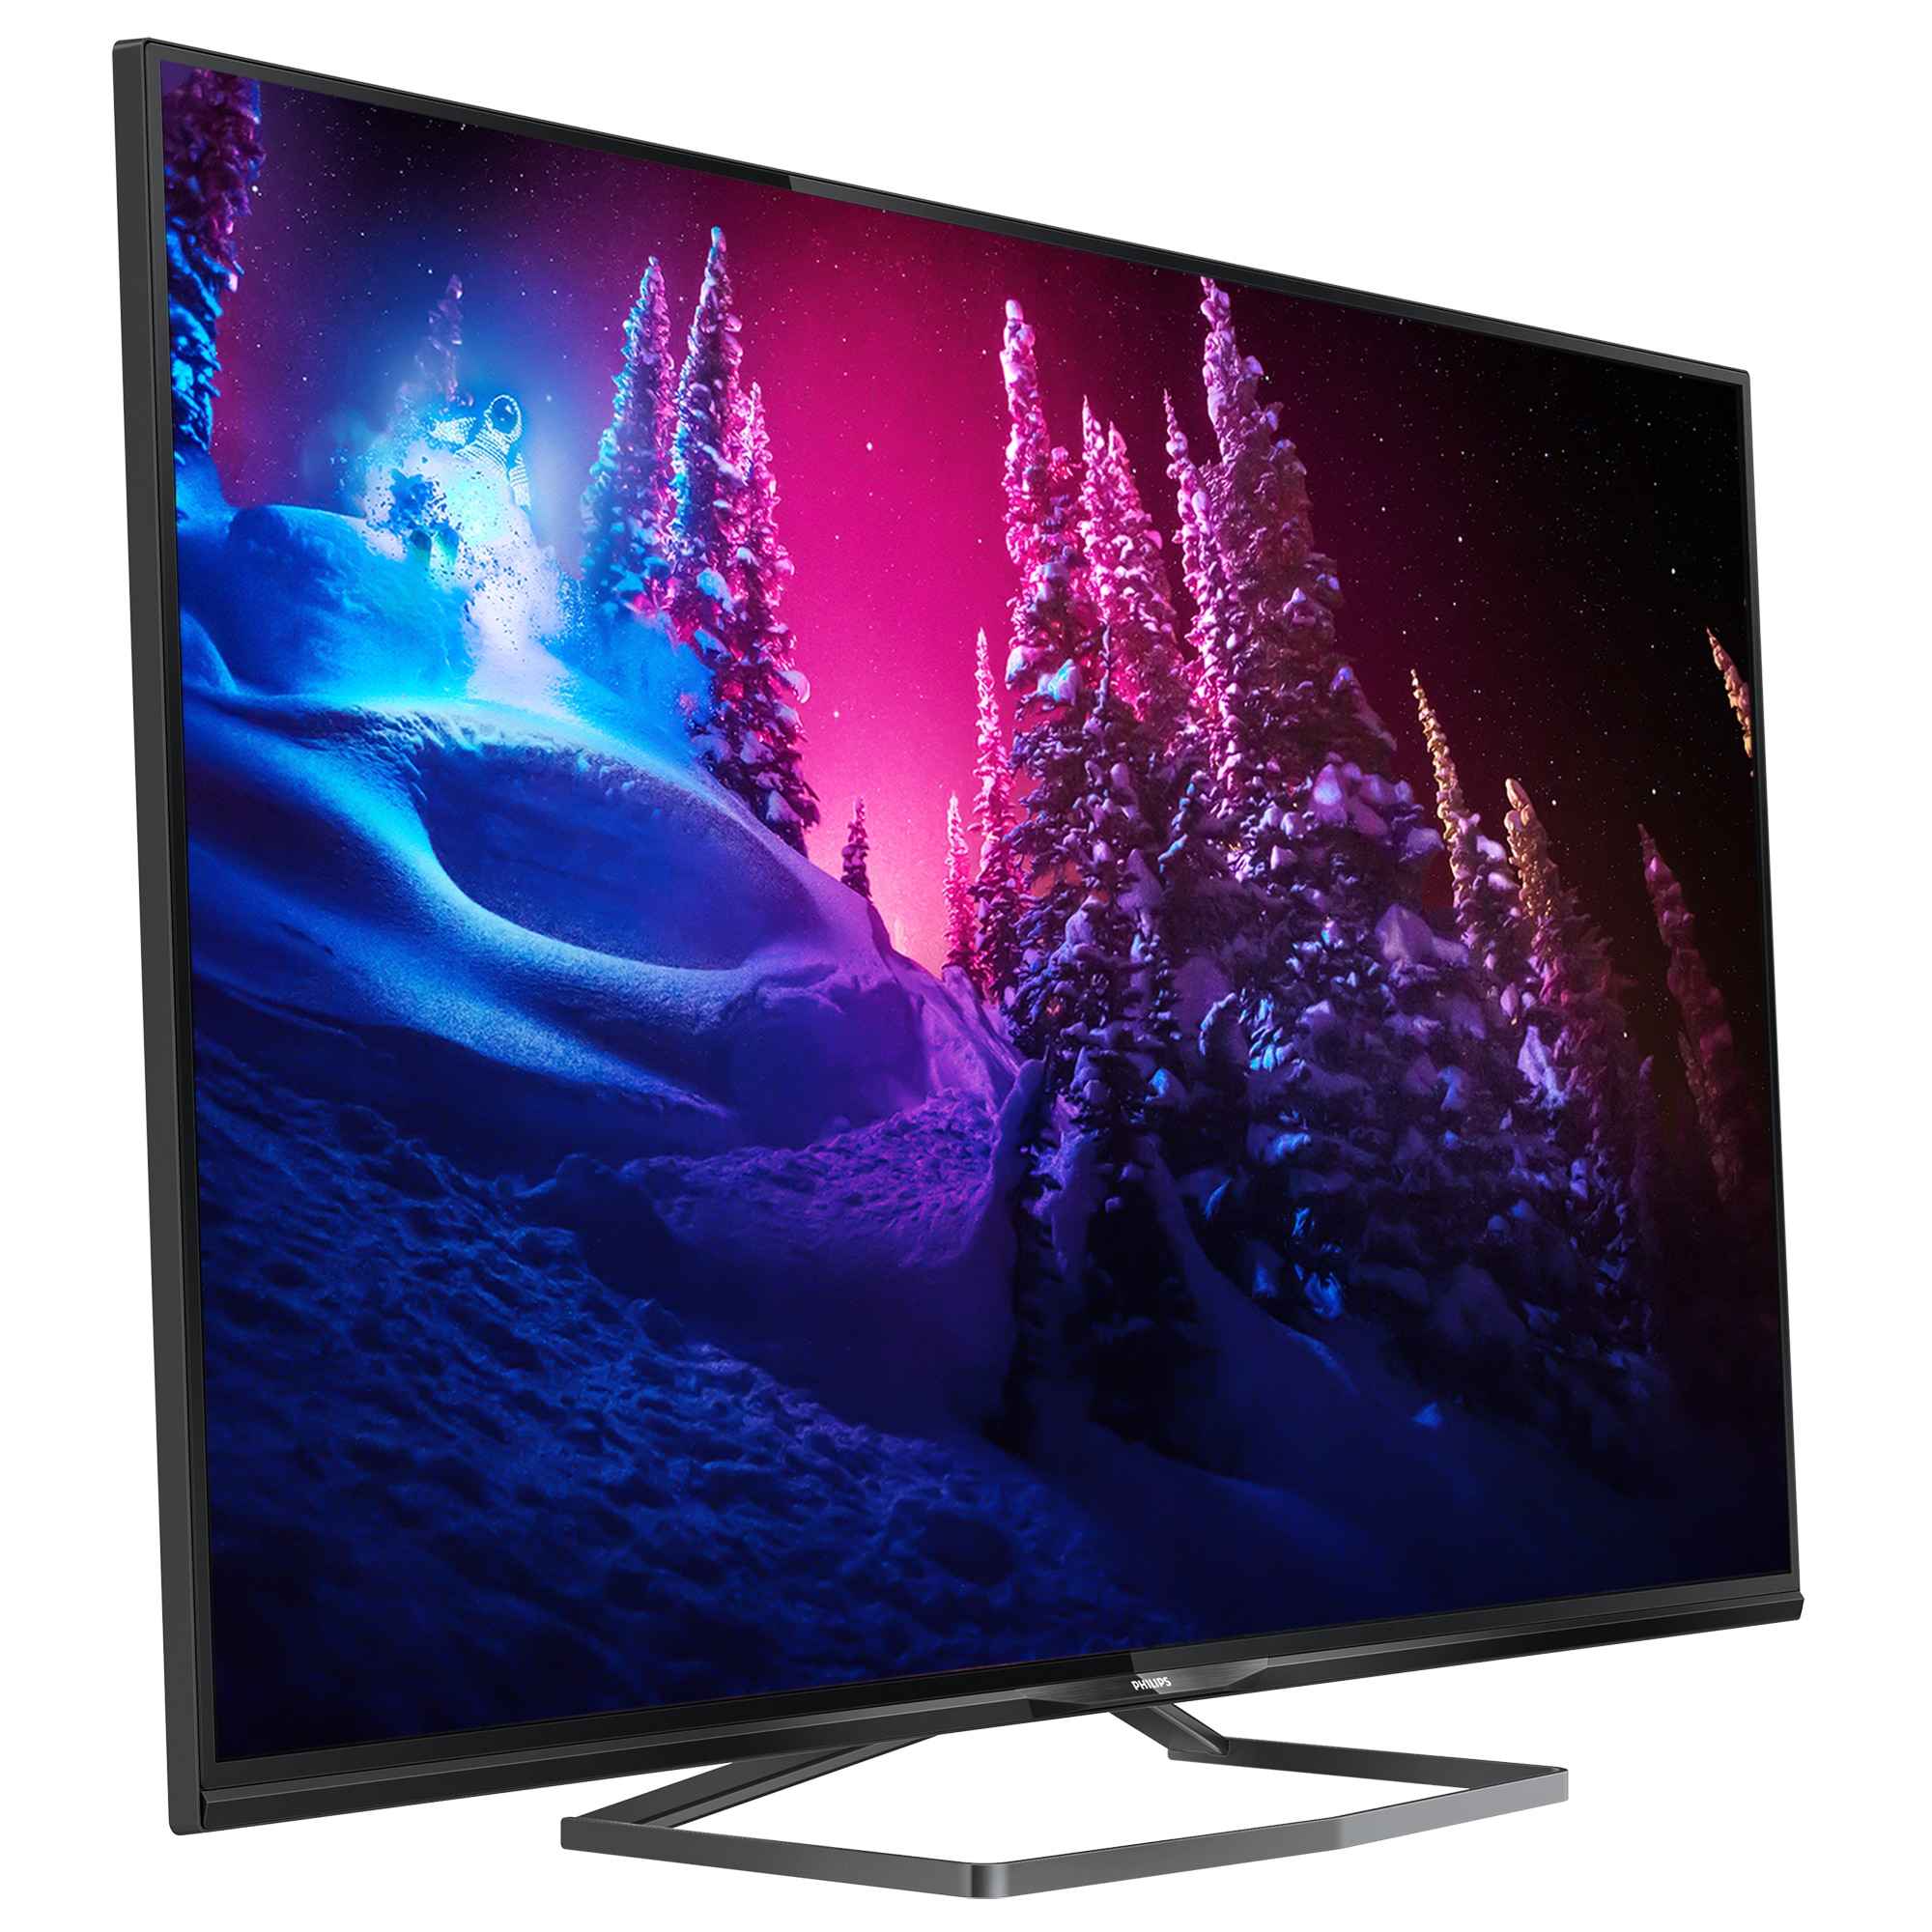 Survive cloth Imperialism Televizor LED Smart TV 3D Philips, 102 cm, 40PUS6809, 4K Ultra HD, Clasa A+  - eMAG.ro